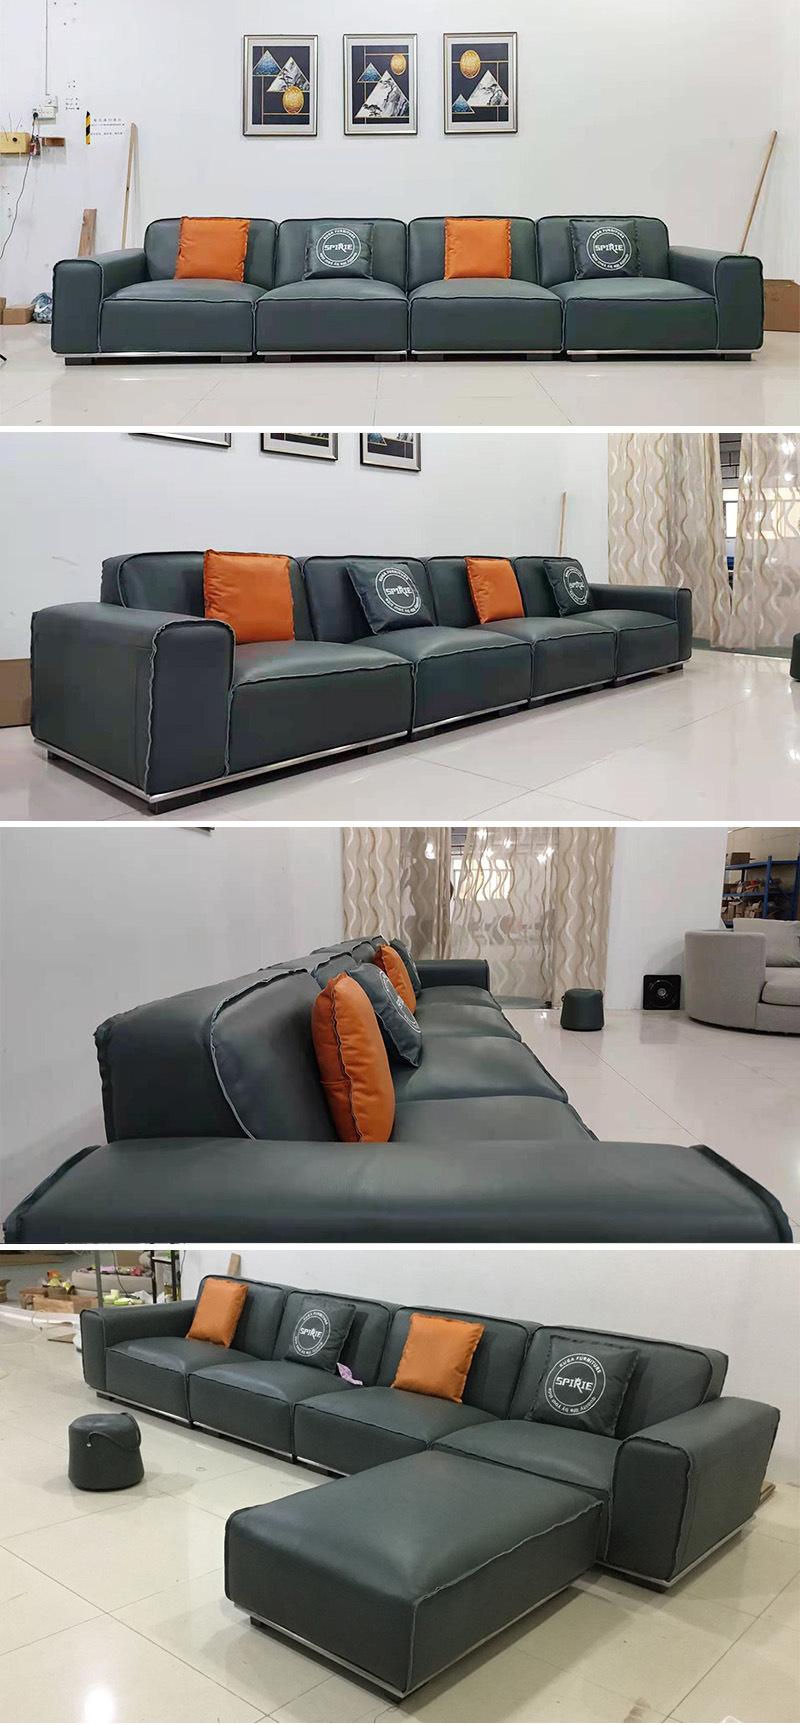 Fabric Seating Contemporary Sofa Leisure Home Leather Couch for Living Room Furniture Set 2827